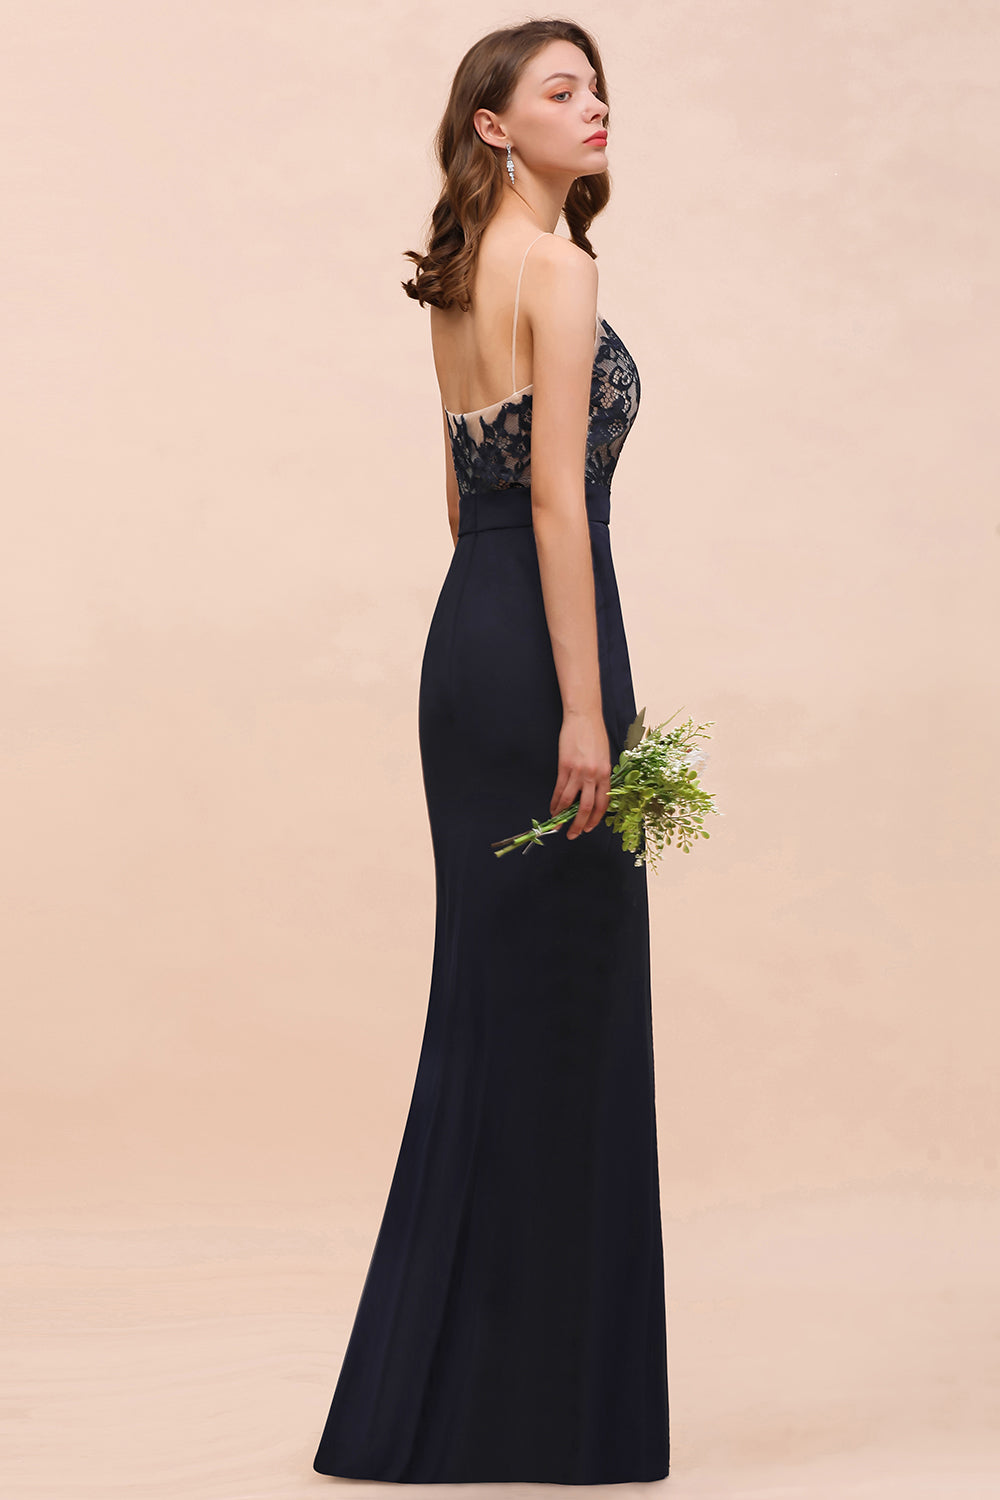 Load image into Gallery viewer, Chic Dark Navy Long Mermaid Spaghetti Straps Bridesmaid Dress with Lace-BIZTUNNEL
